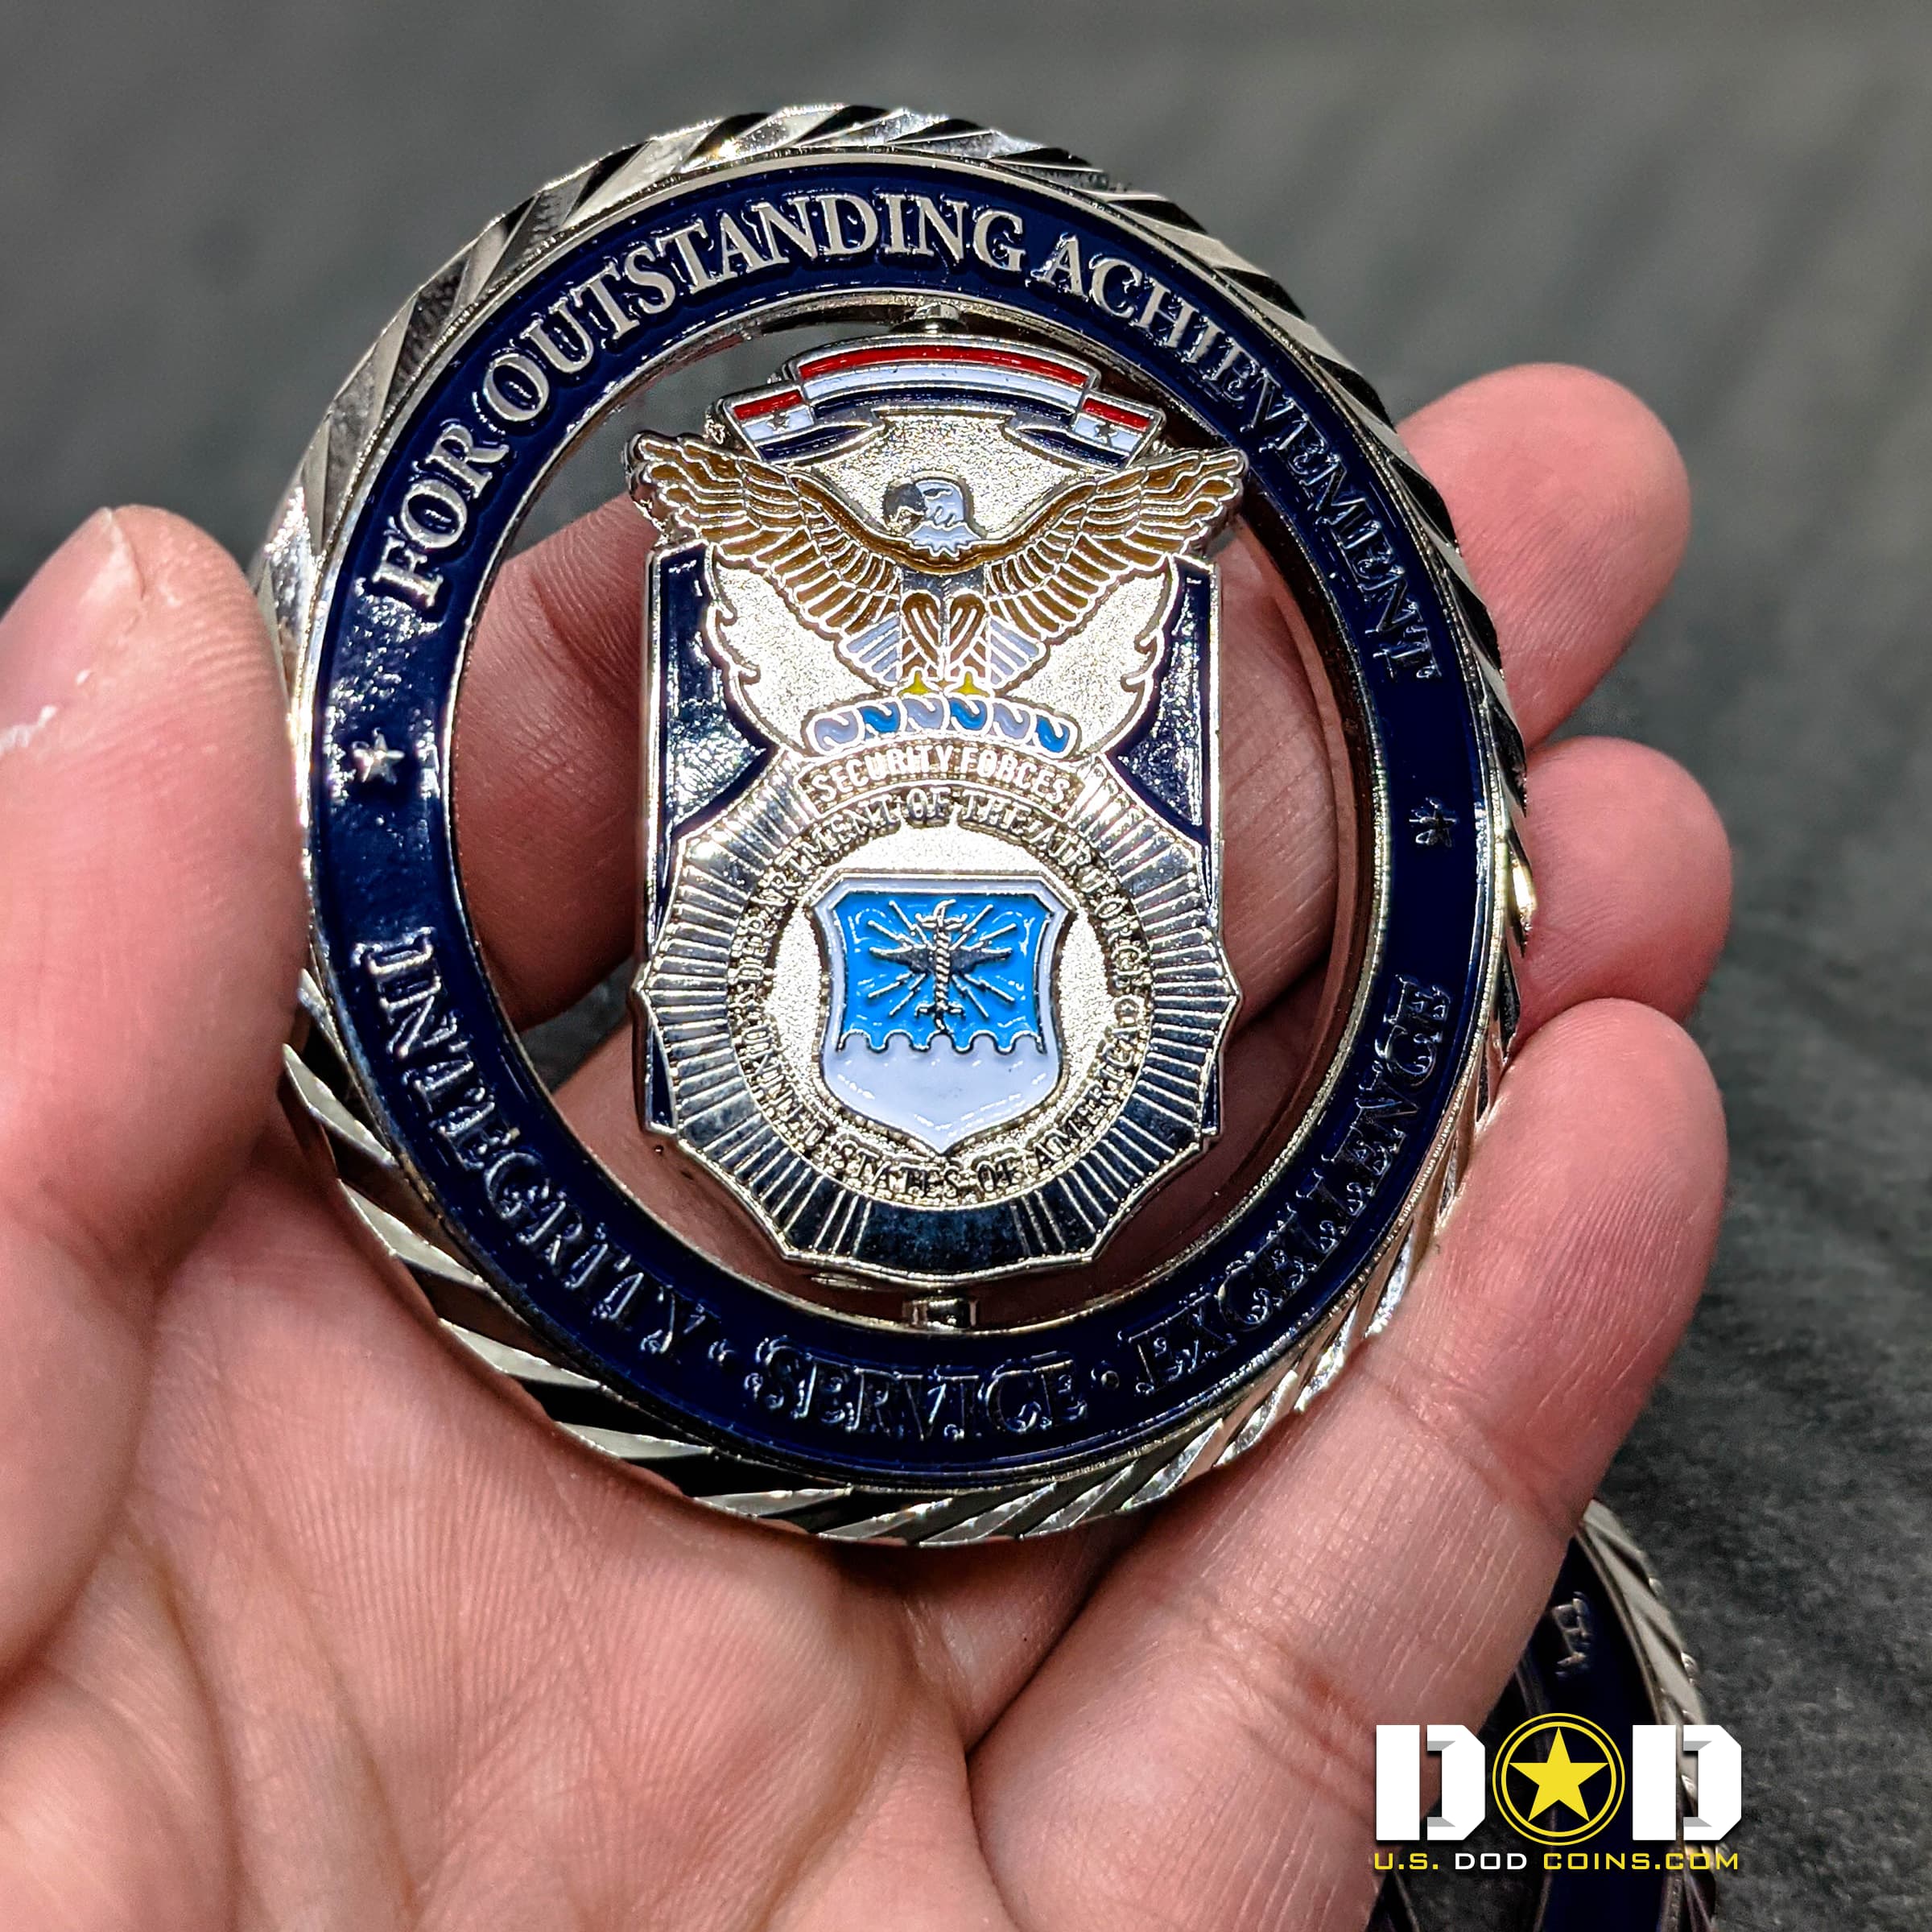 Security-Forces-Air-Force-Spinning-Challenge-Coin_0002_USDODCoins-Challenge-Coins-Examples-99